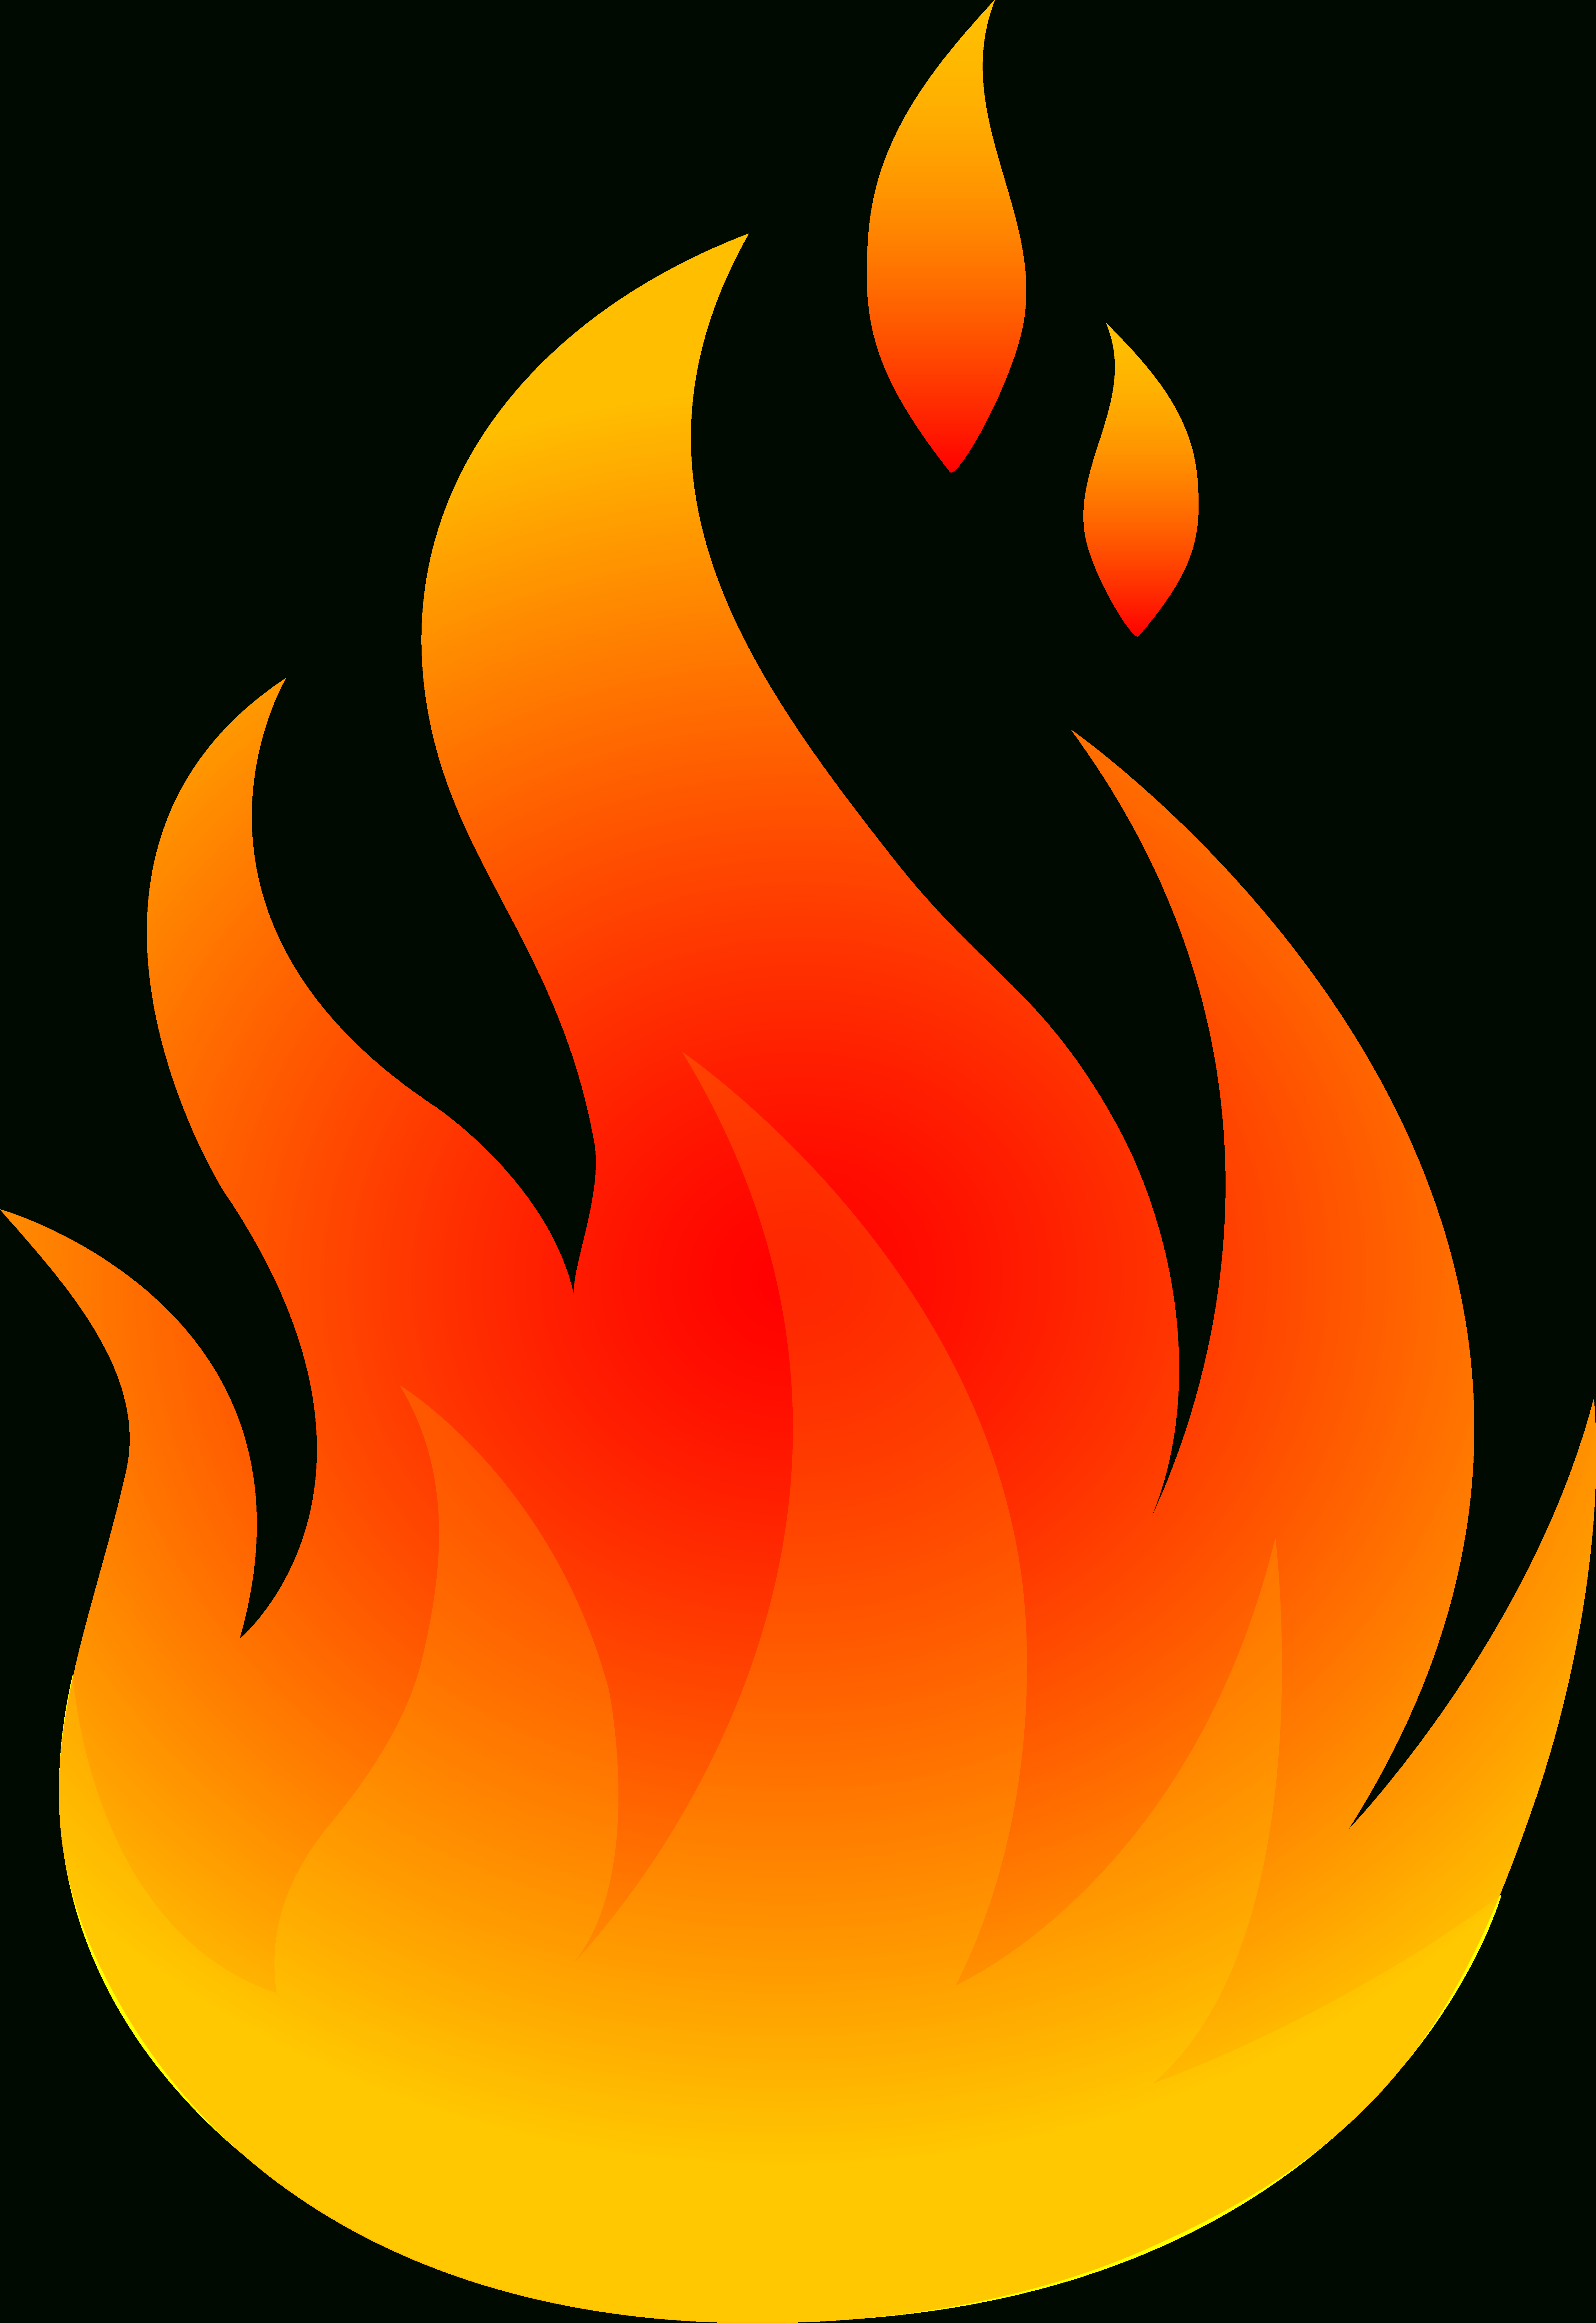 How To Draw Fire Flames How To Draw Cartoon Fire Flames | Clipart ...